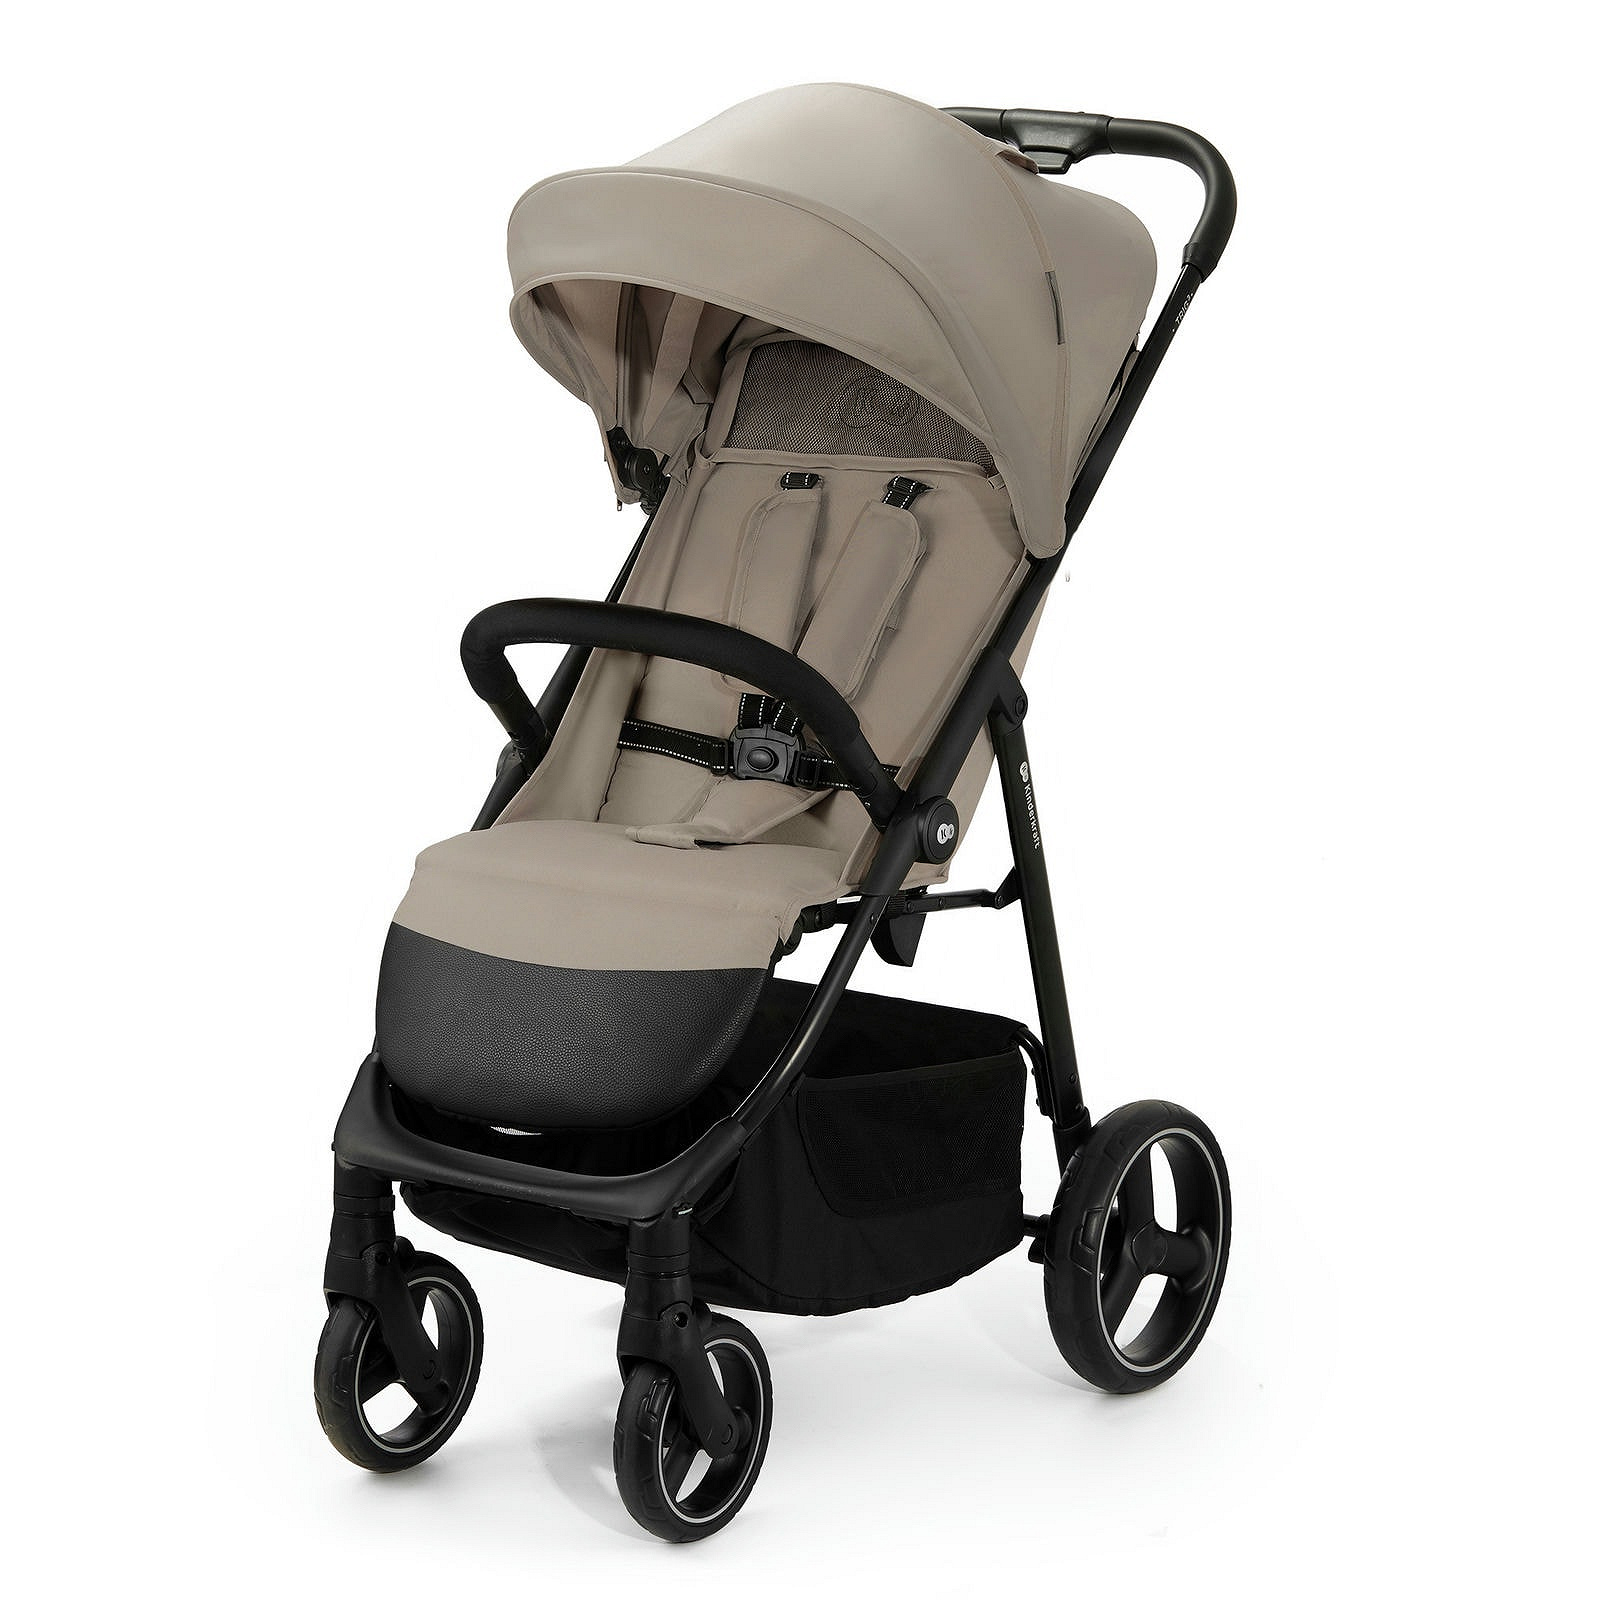 A pushchair up to 25 kg